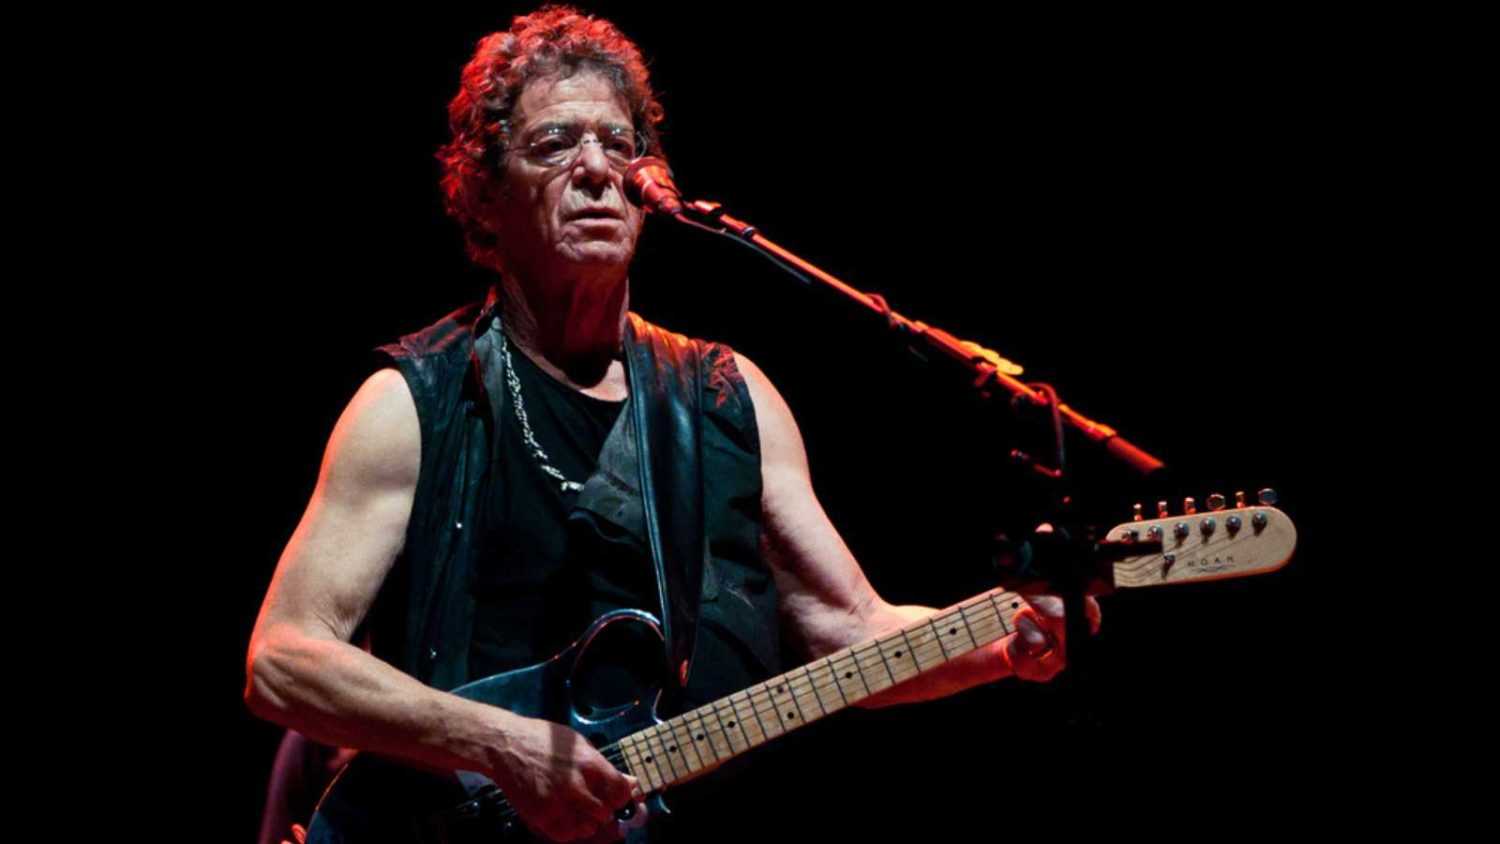 <p>Two respondents point specifically to the live version of this classic song. One suggests that Steve Hunter’s guitar work is "incredible." Other claims that Lou Reed comes in far too early but still fails to ruin one of music’s great intros.</p>